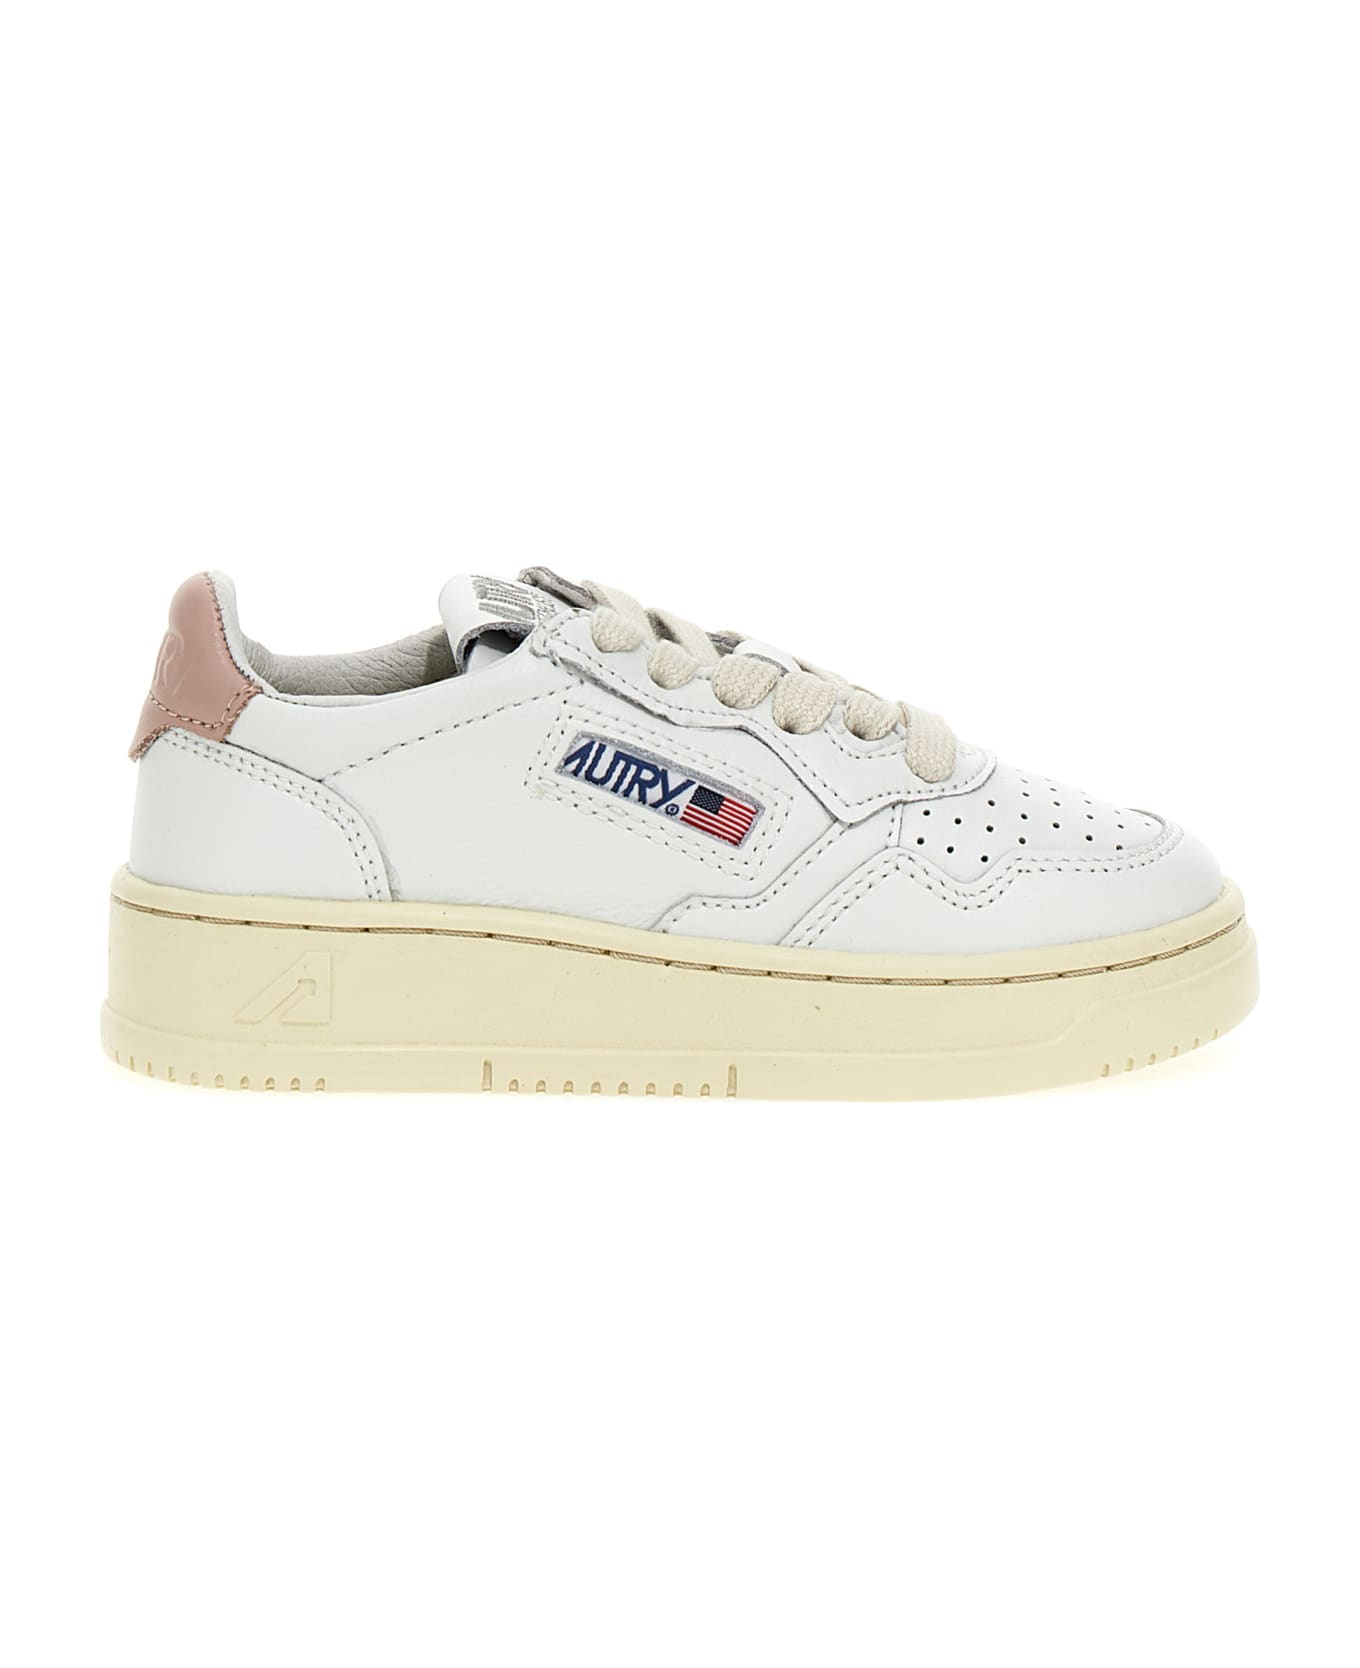 Autry 'autry Kids Low' Sneakers - Bianco